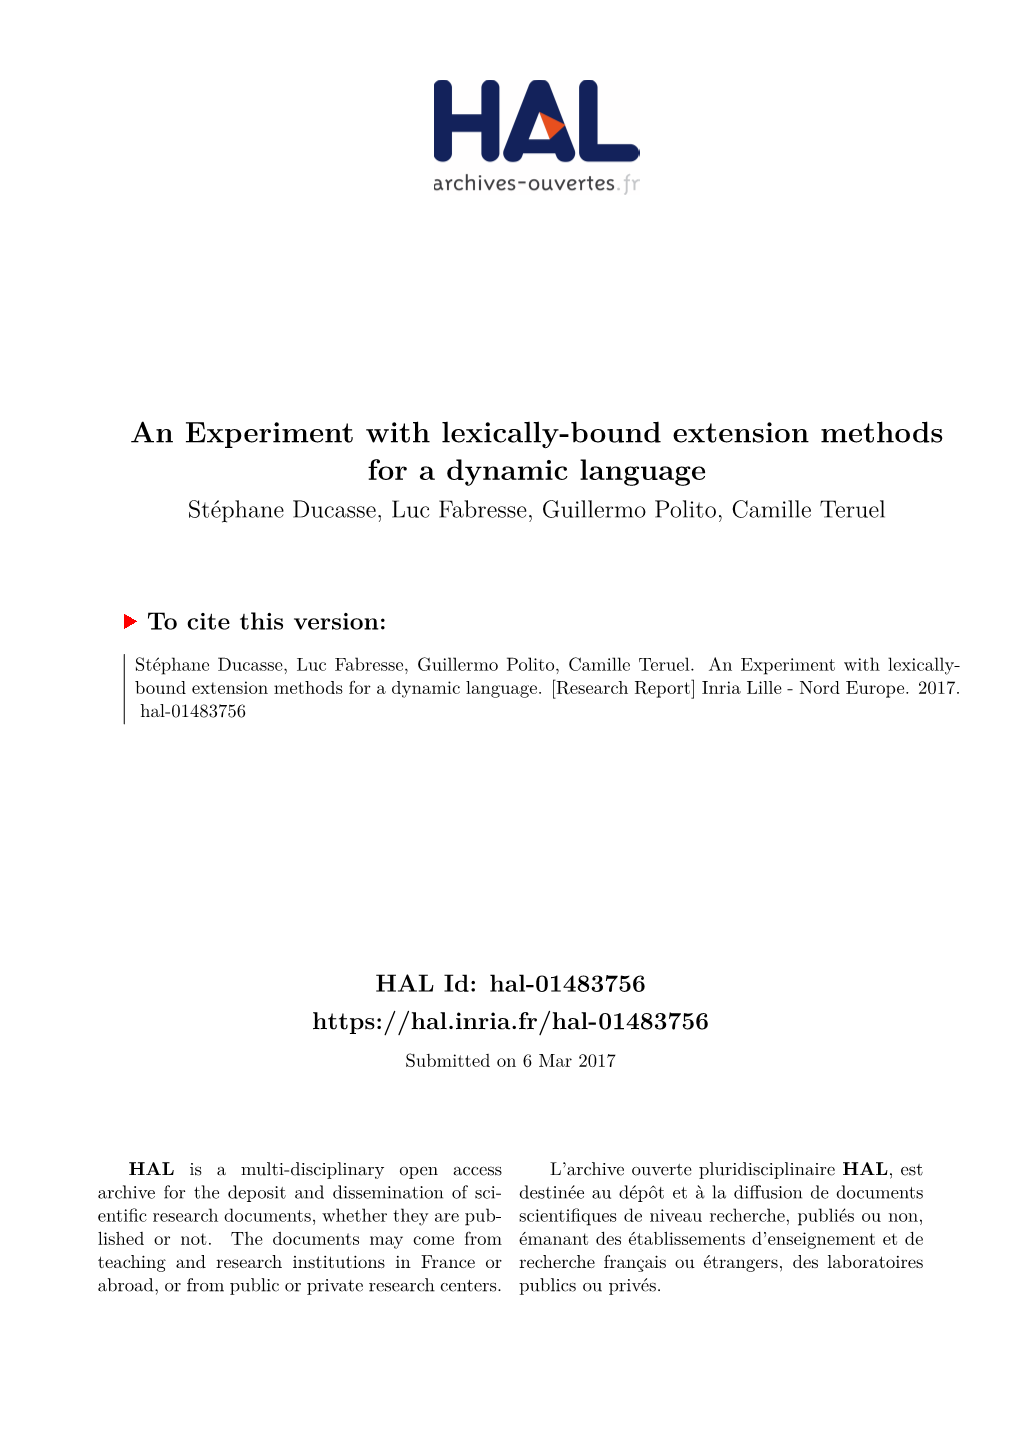 An Experiment with Lexically-Bound Extension Methods for a Dynamic Language Stéphane Ducasse, Luc Fabresse, Guillermo Polito, Camille Teruel